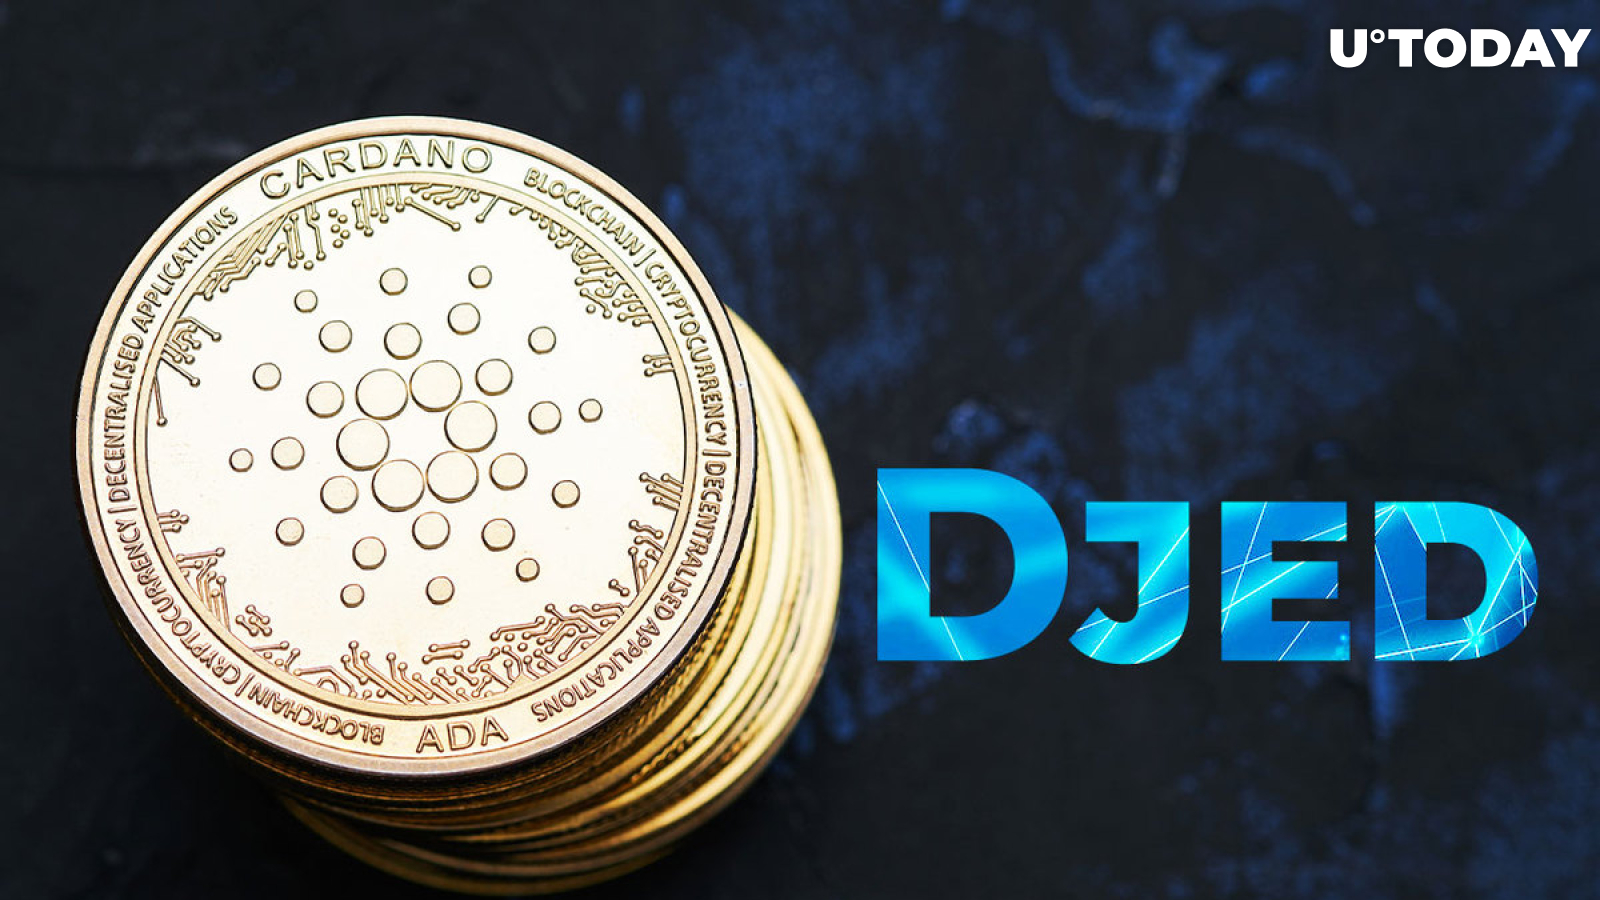 Cardano's Djed Stablecoin Might Soon Launch; Here's When